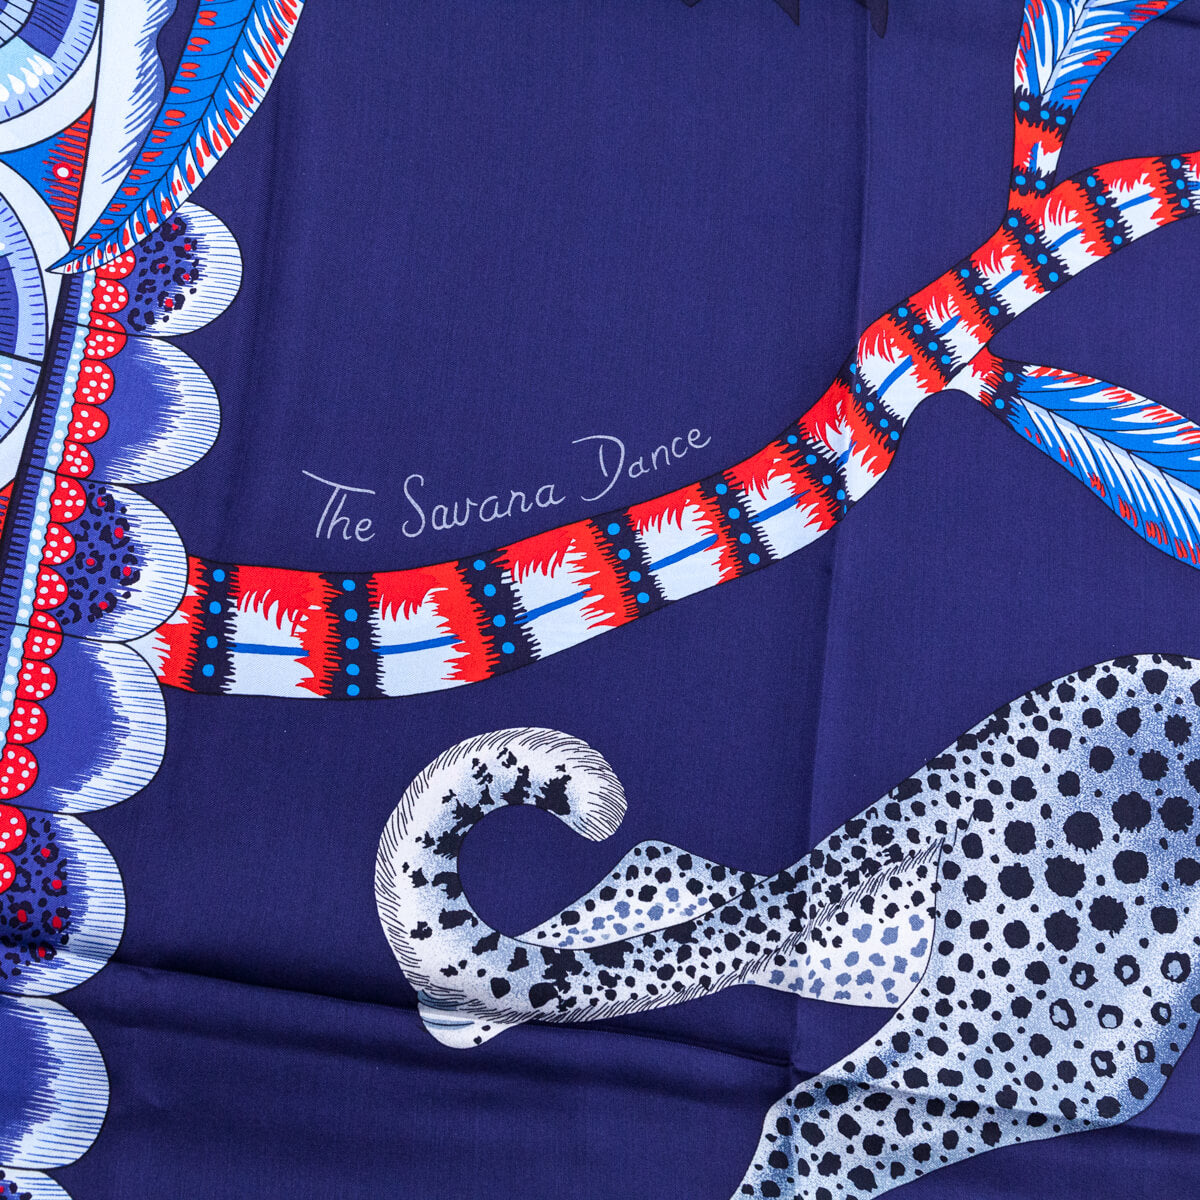 Hermes Blue & Red Silk The Savana Dance Carre Geant Scarf - Love that Bag etc - Preowned Authentic Designer Handbags & Preloved Fashions